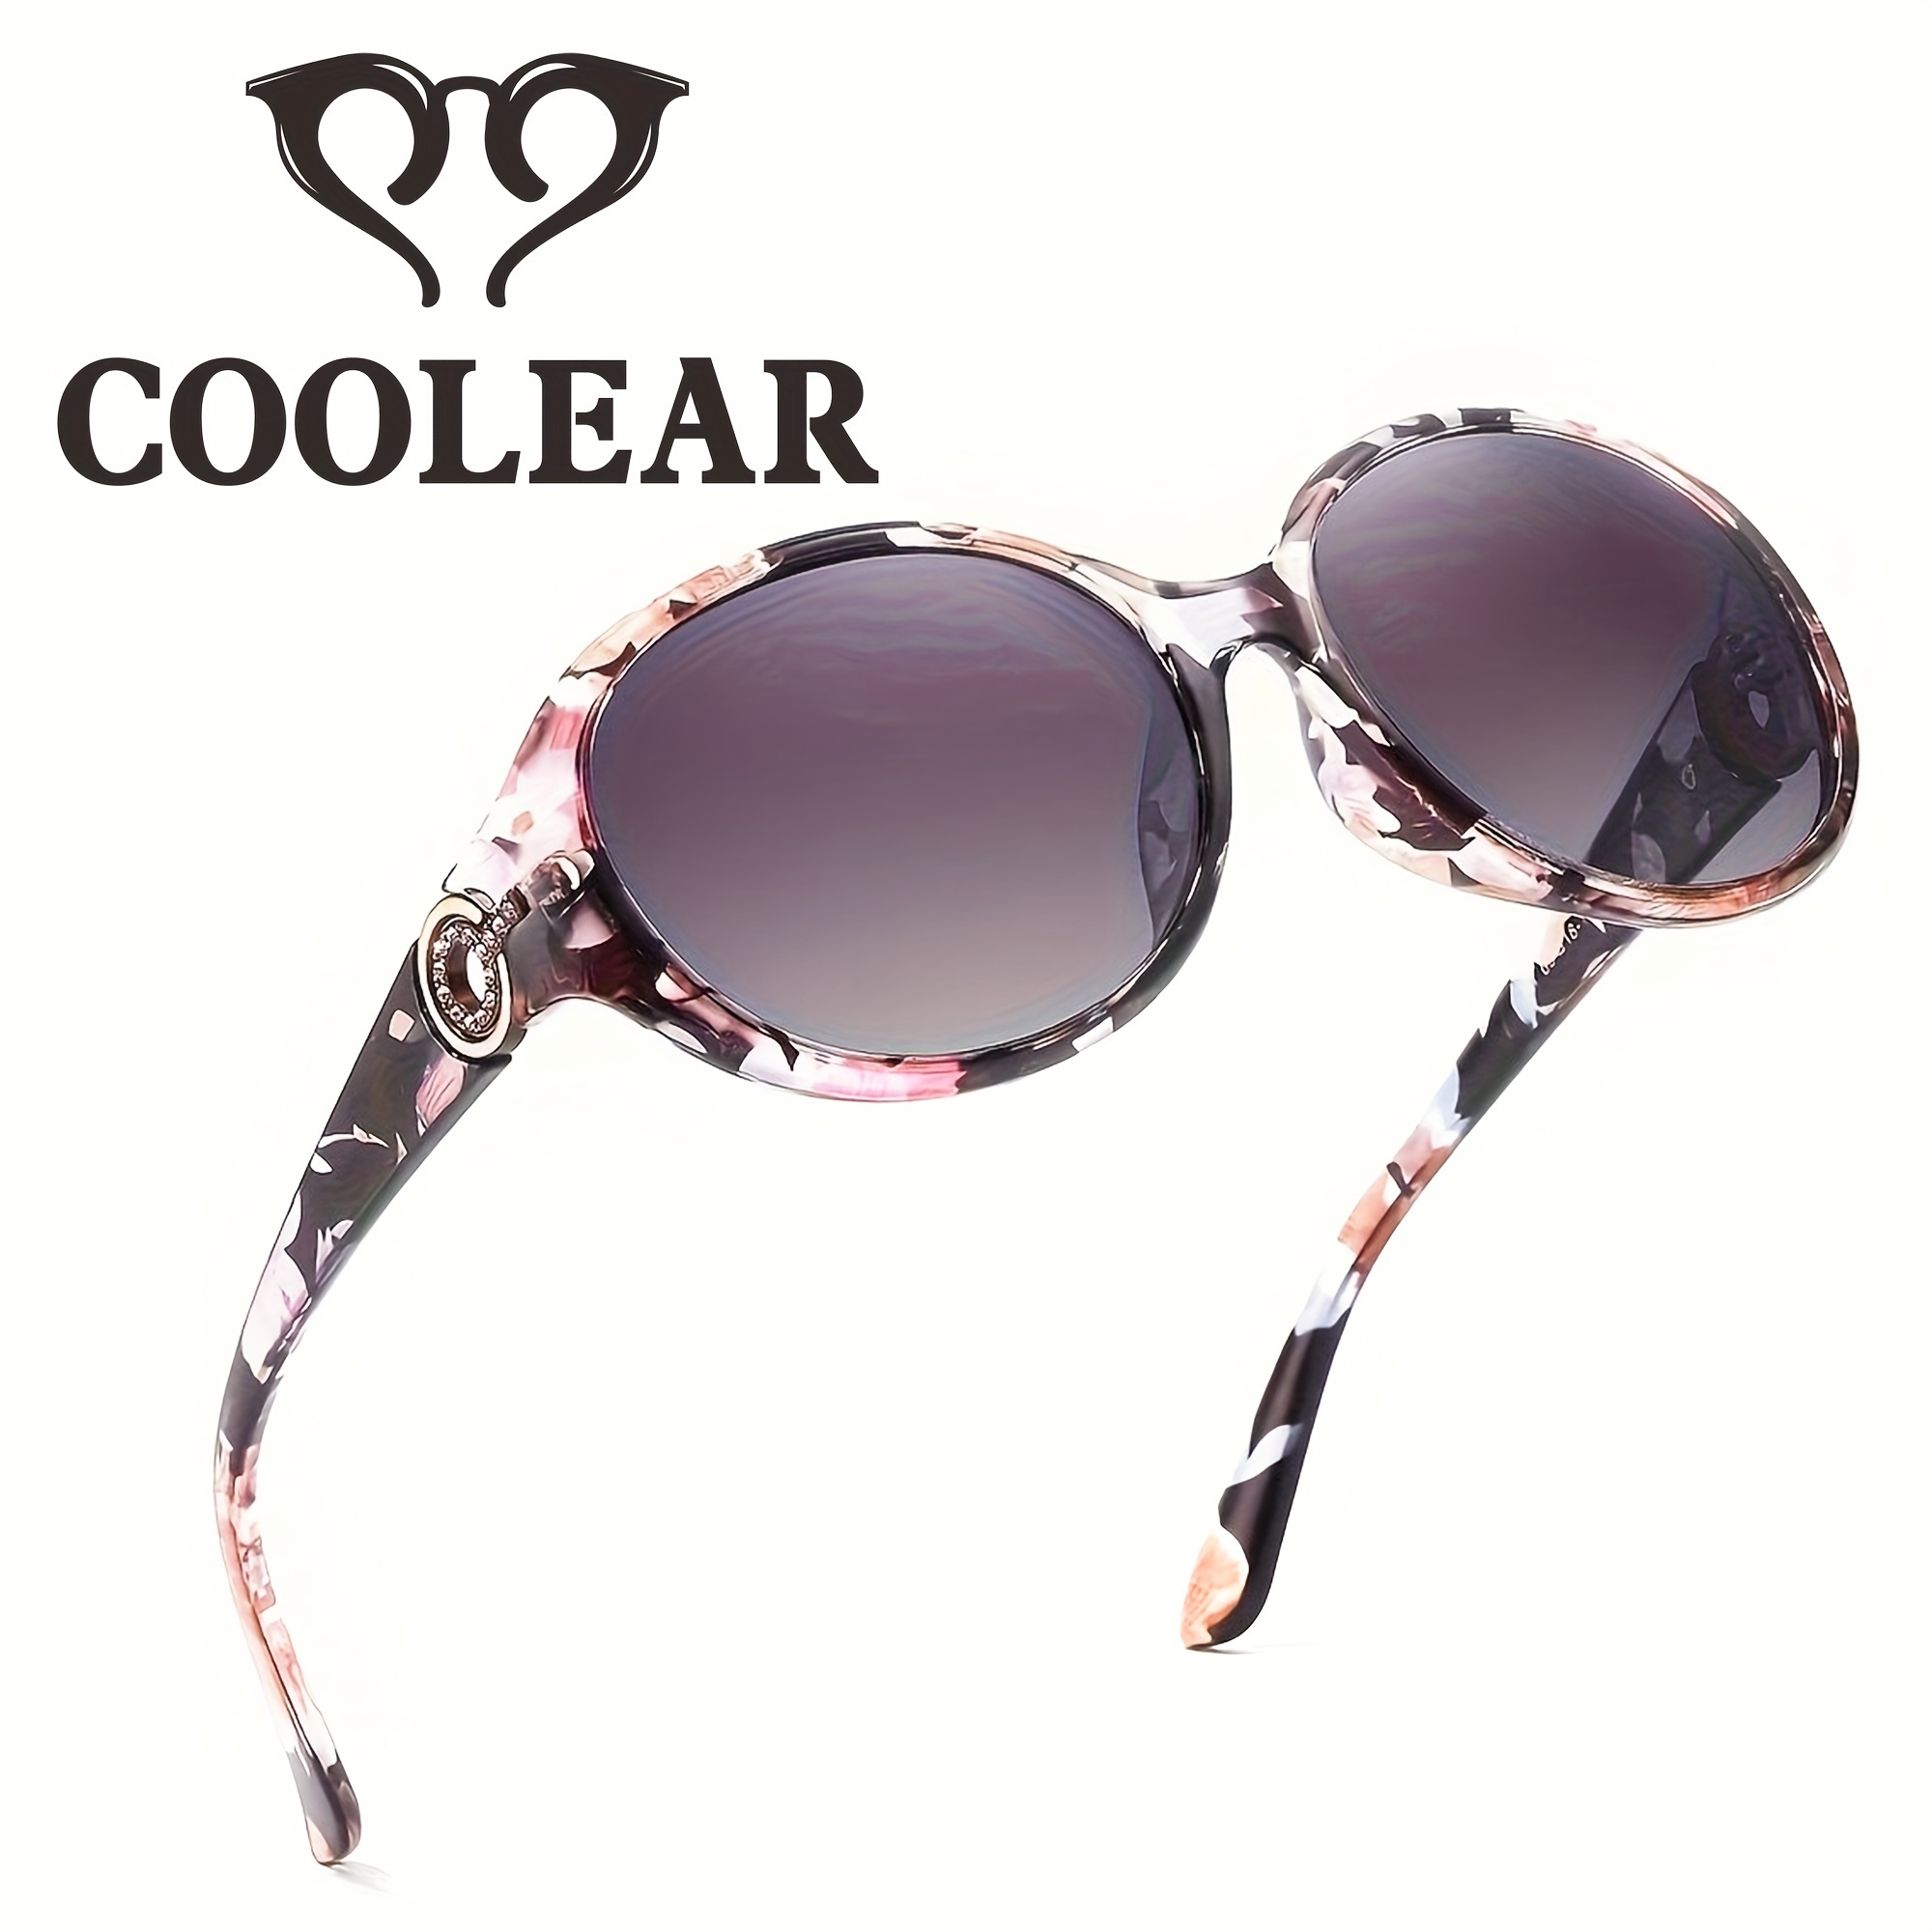 

Coolear Polarized Glasses For Women Vintage Glasses Oversized Big Glasses Ladies Shades